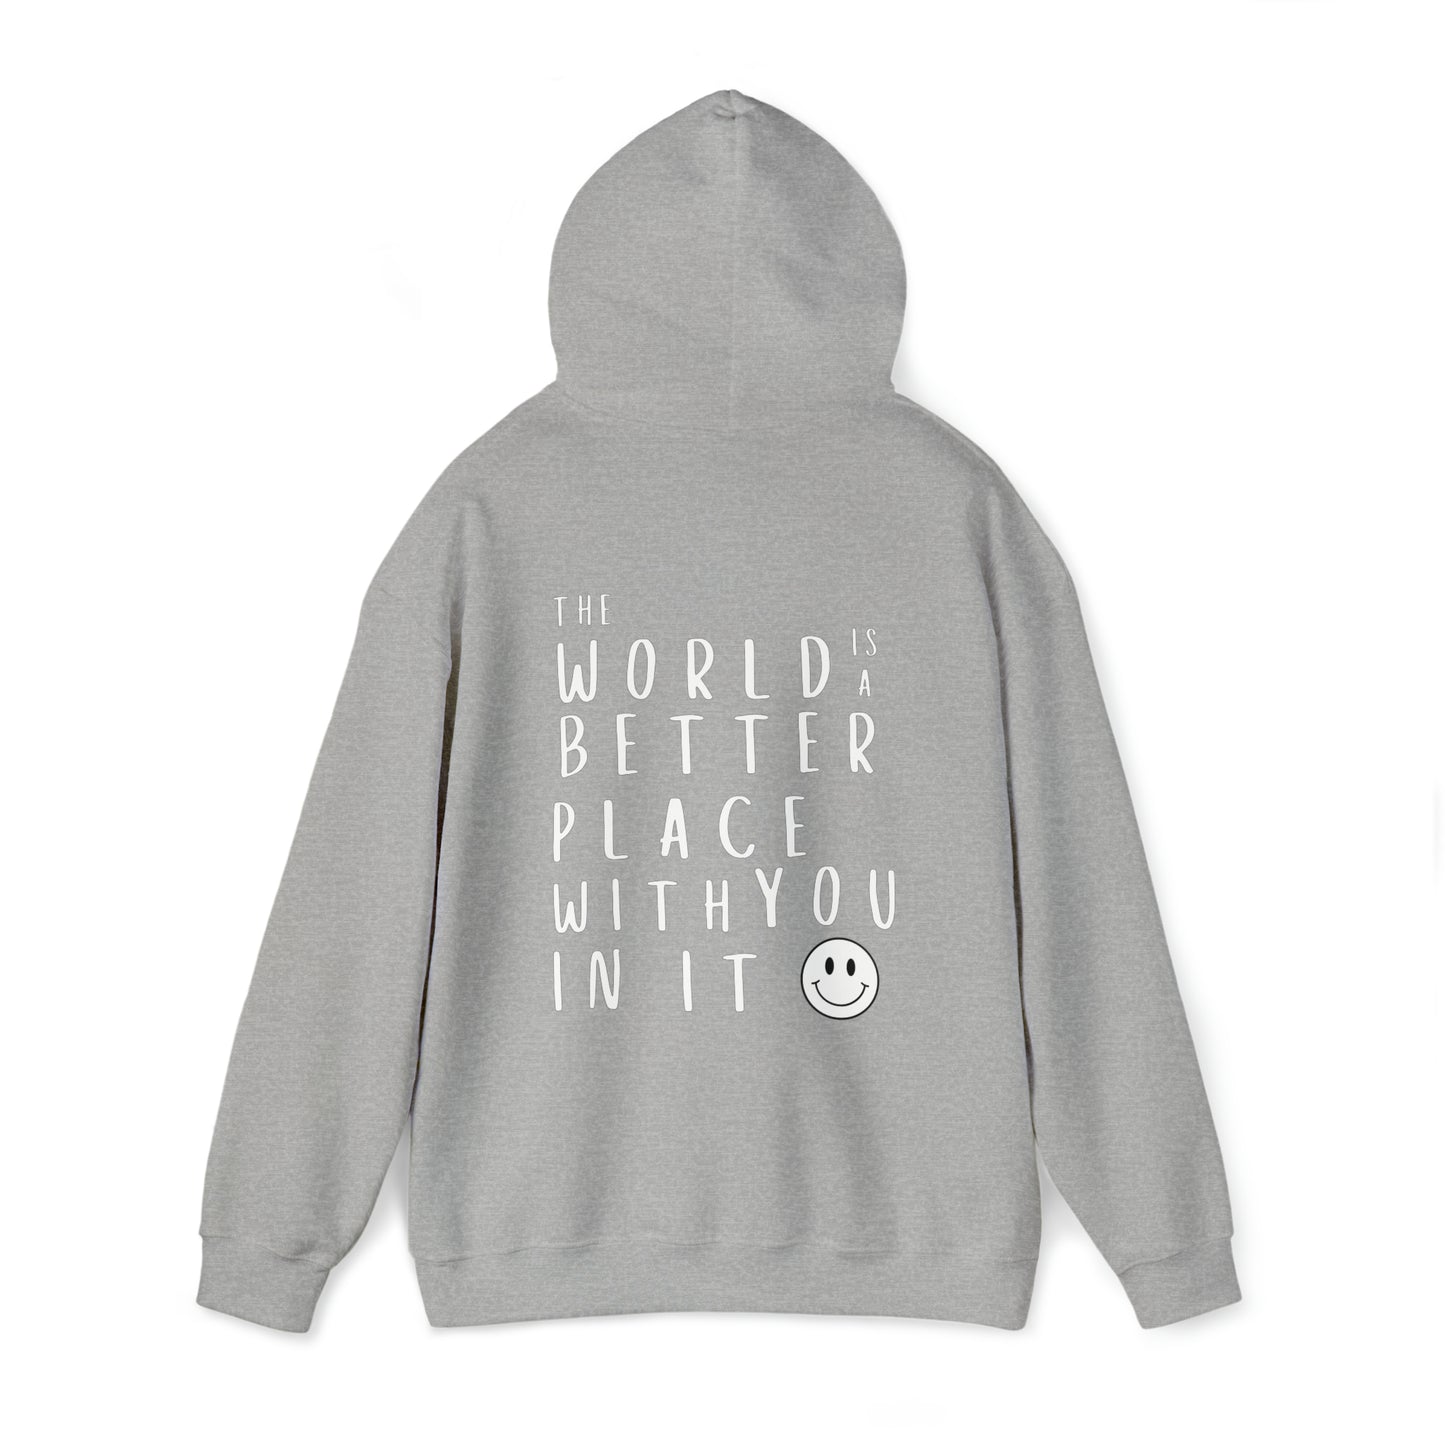 Smile: The World is a Better Place With You Hooded Sweatshirt